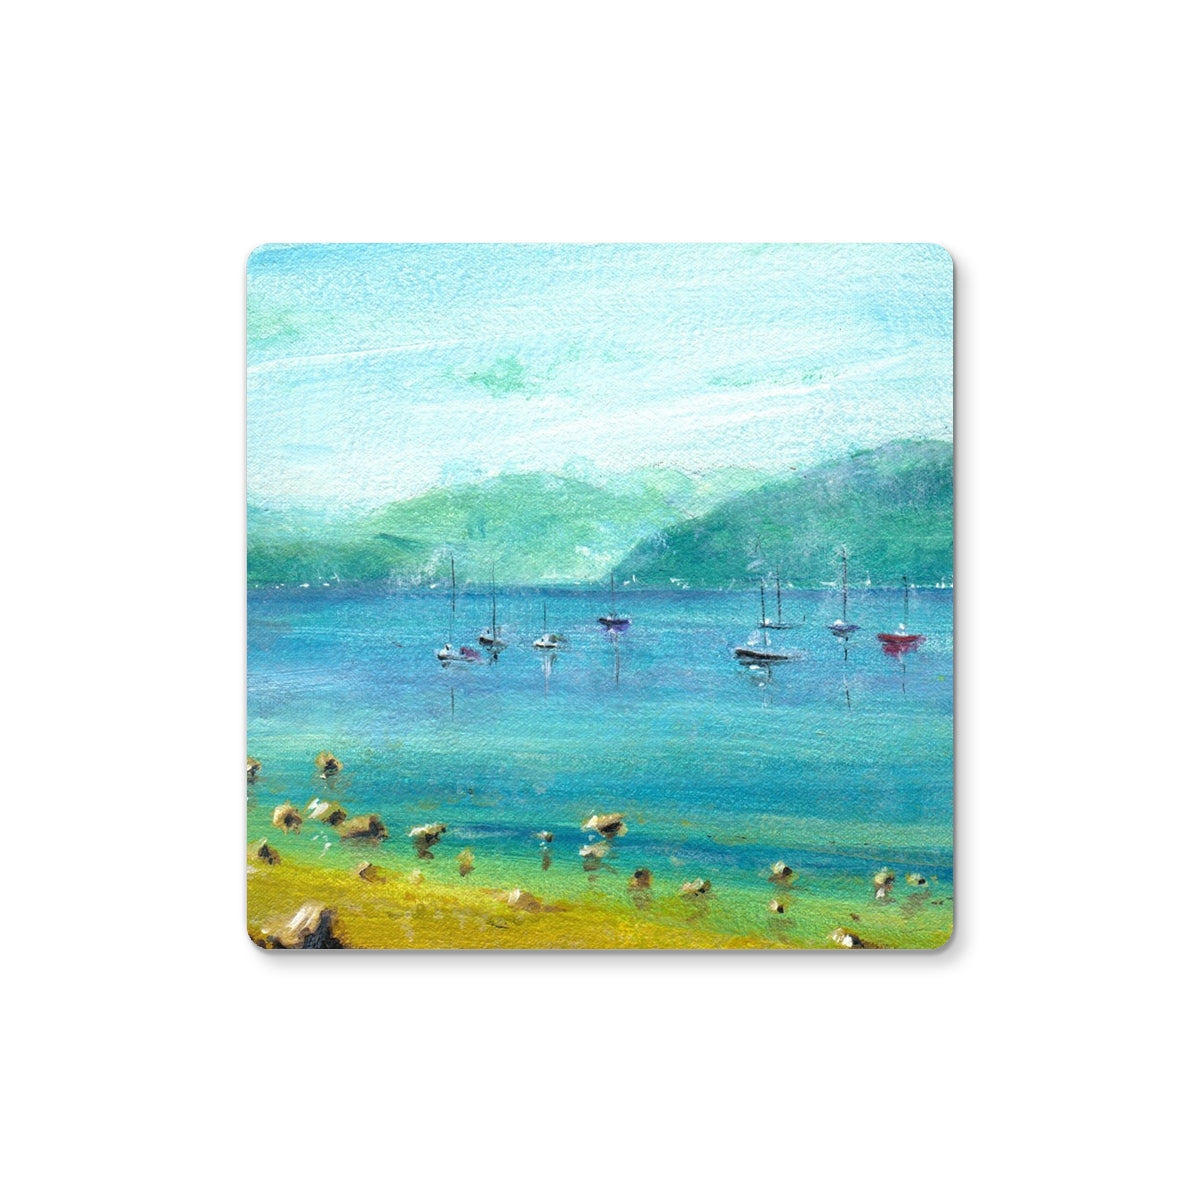 A Clyde Summer Day Art Gifts Coaster-Homeware-River Clyde Art Gallery-2 Coasters-Paintings, Prints, Homeware, Art Gifts From Scotland By Scottish Artist Kevin Hunter